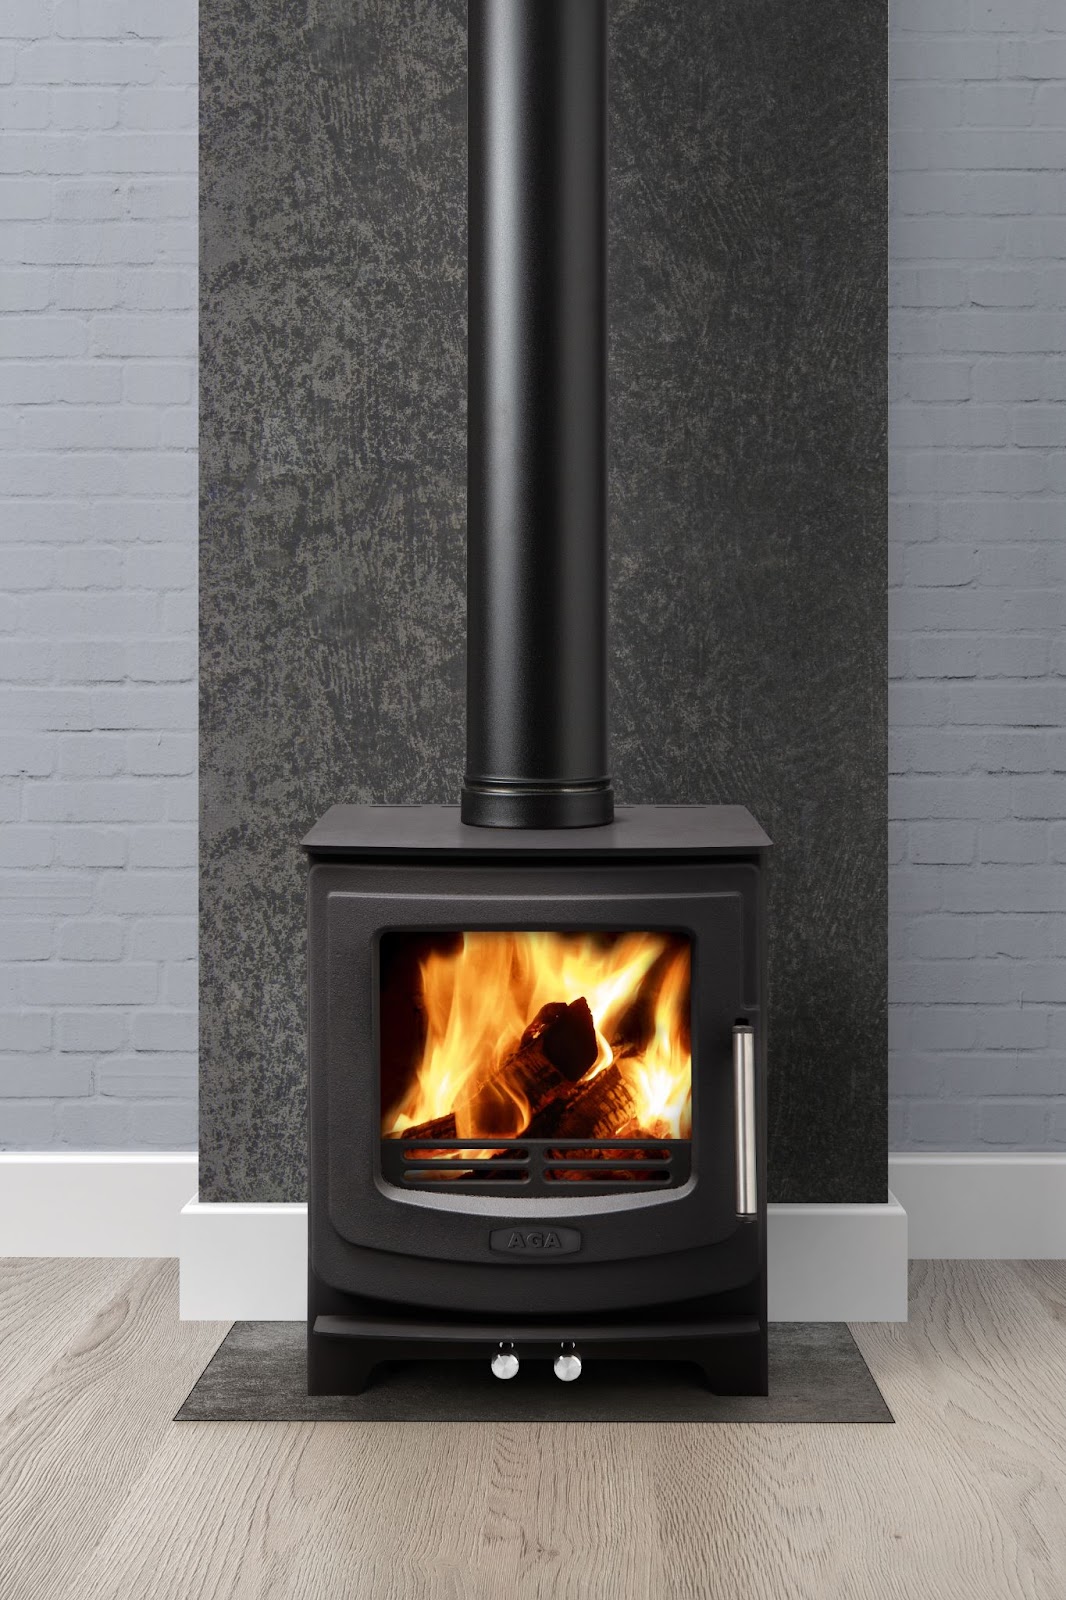 How to Clean A Wood Burning Stove For The Best Performance & Safety